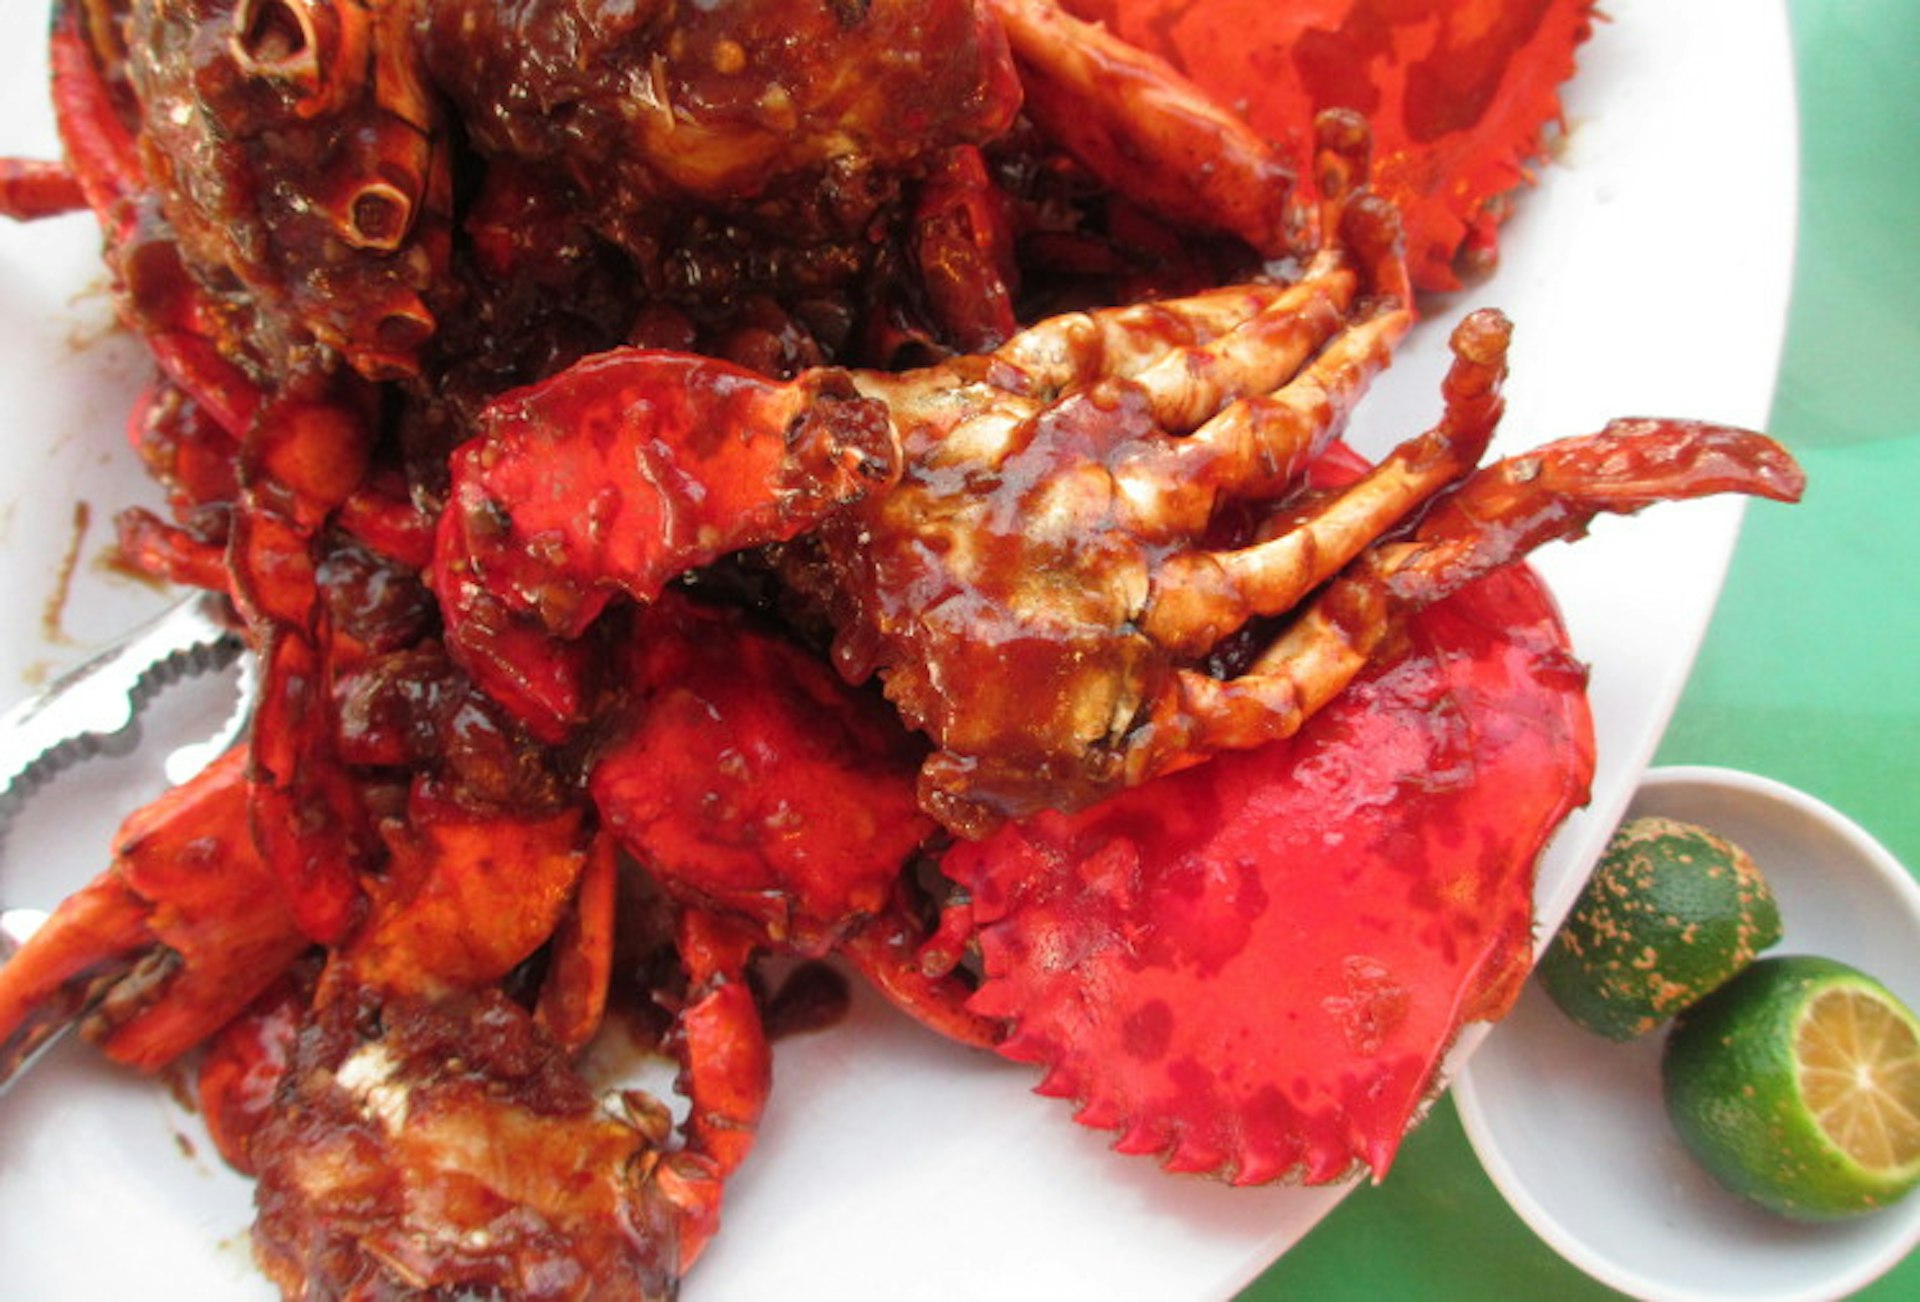 Curry crab at Welcome Seafood restaurant, Kota Kinabalu. Image by Sarah Reid Lonely Planet